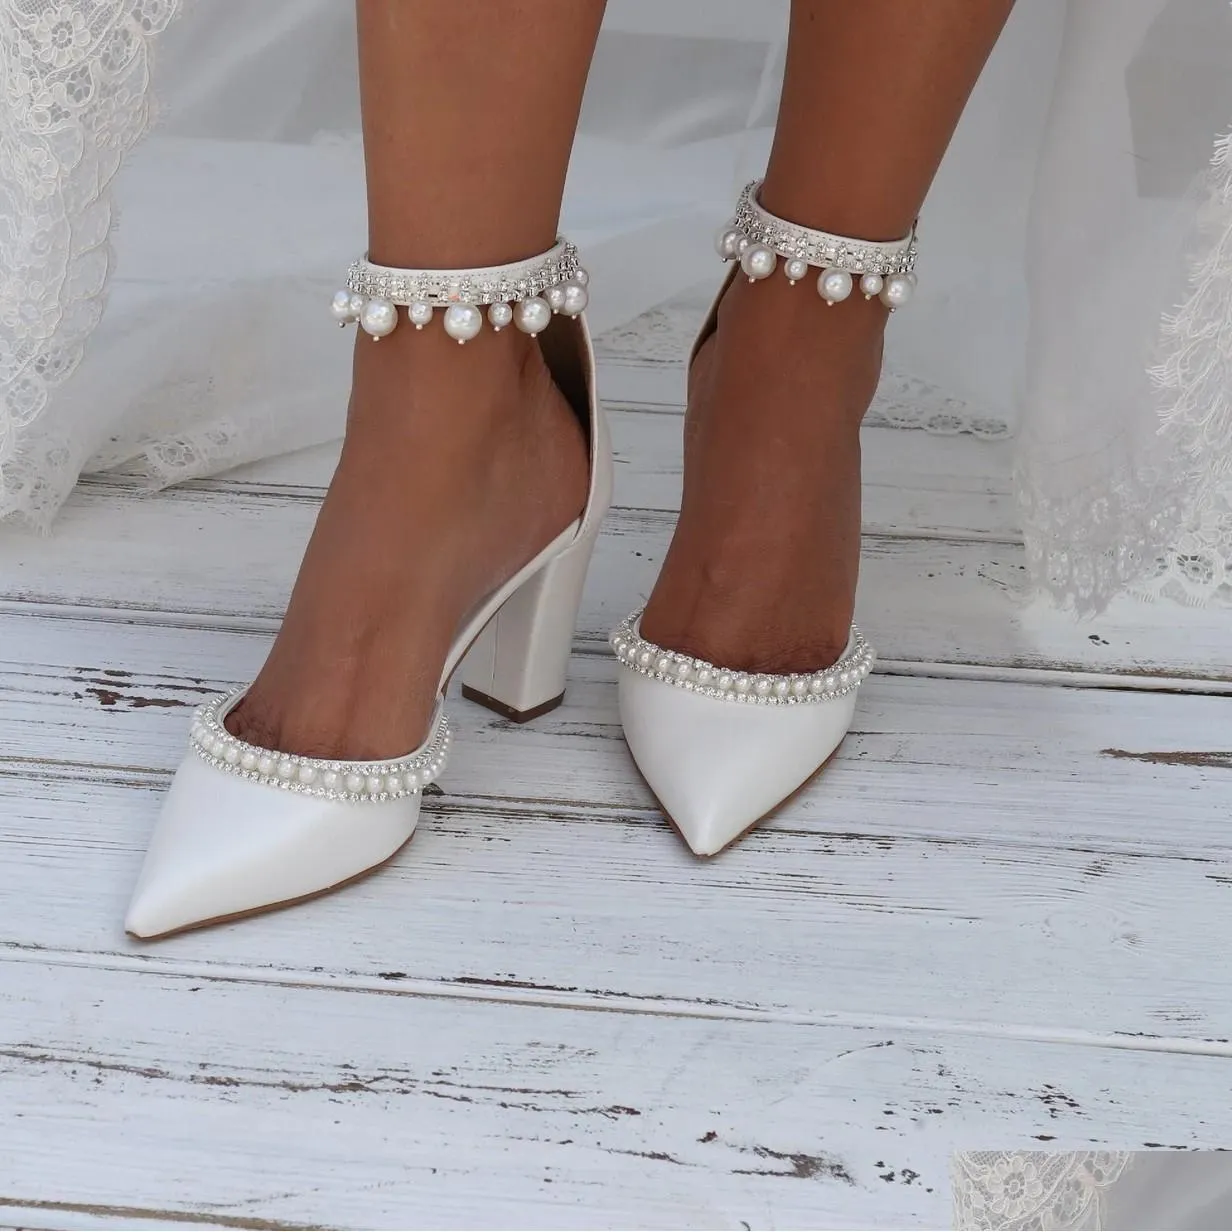 white silk satin wedding shoes pointed toe elegant pearls sparkle crystals beaded women pumps chunky high heel bridal shoes cl03334